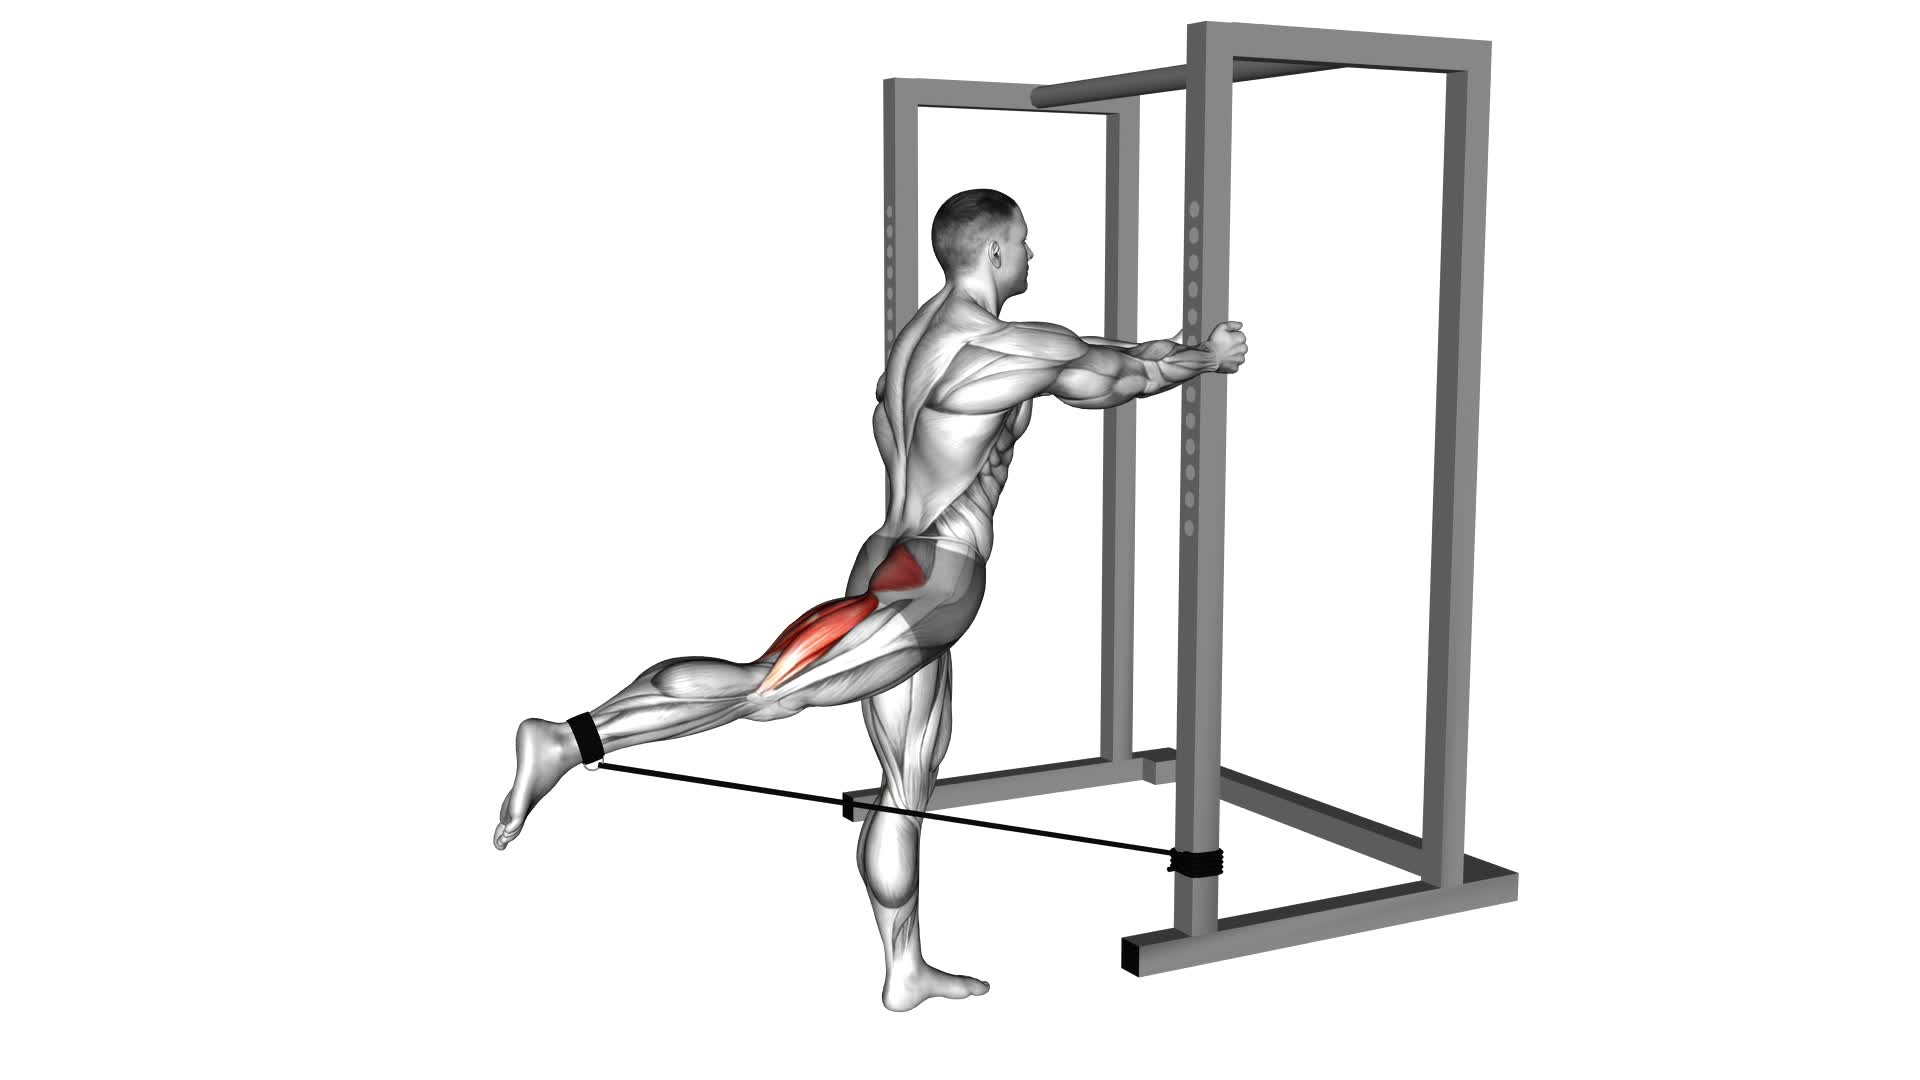 Band Standing Hip Extension (male) - Video Exercise Guide & Tips